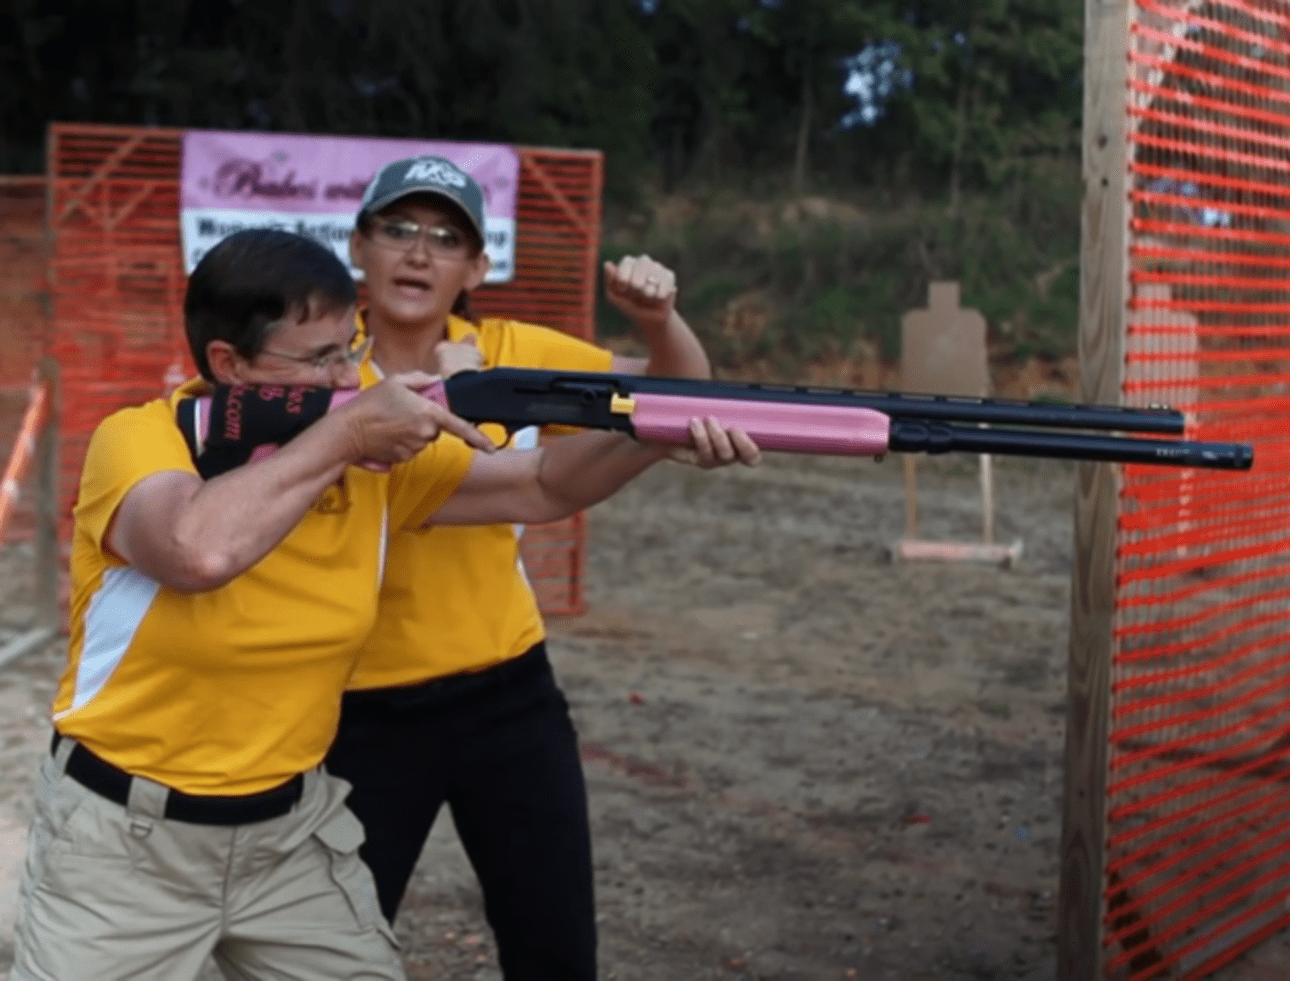 Beginner Target Shooting Tips from Babes with Bullets